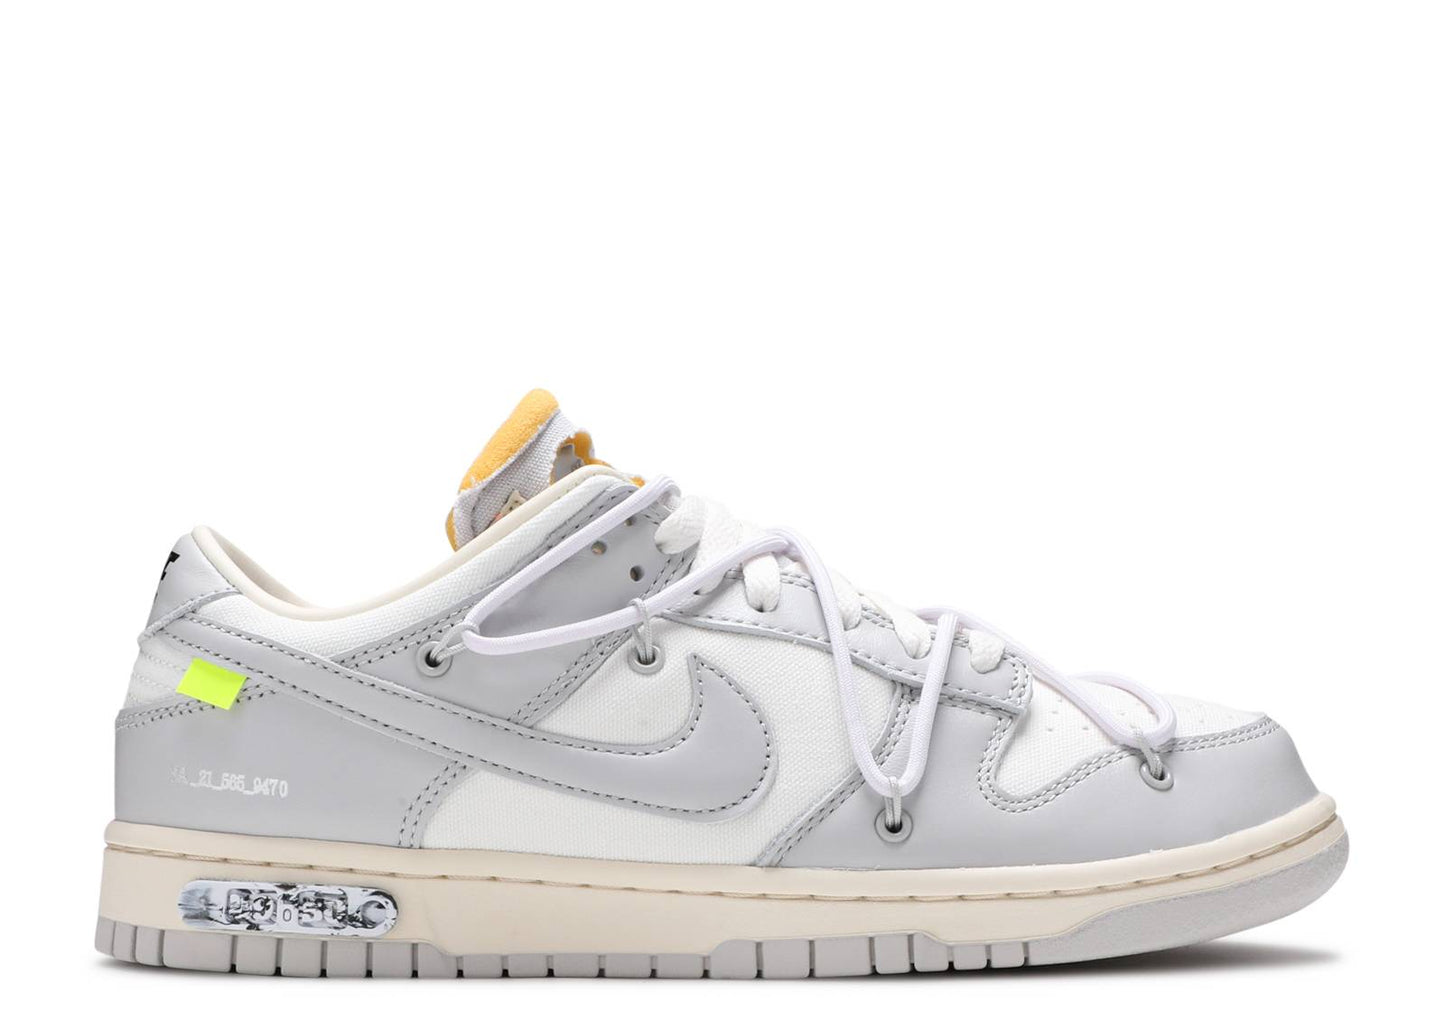 Off-White x Nike Dunk Low "Dear Summer - Lot 49 of 50"